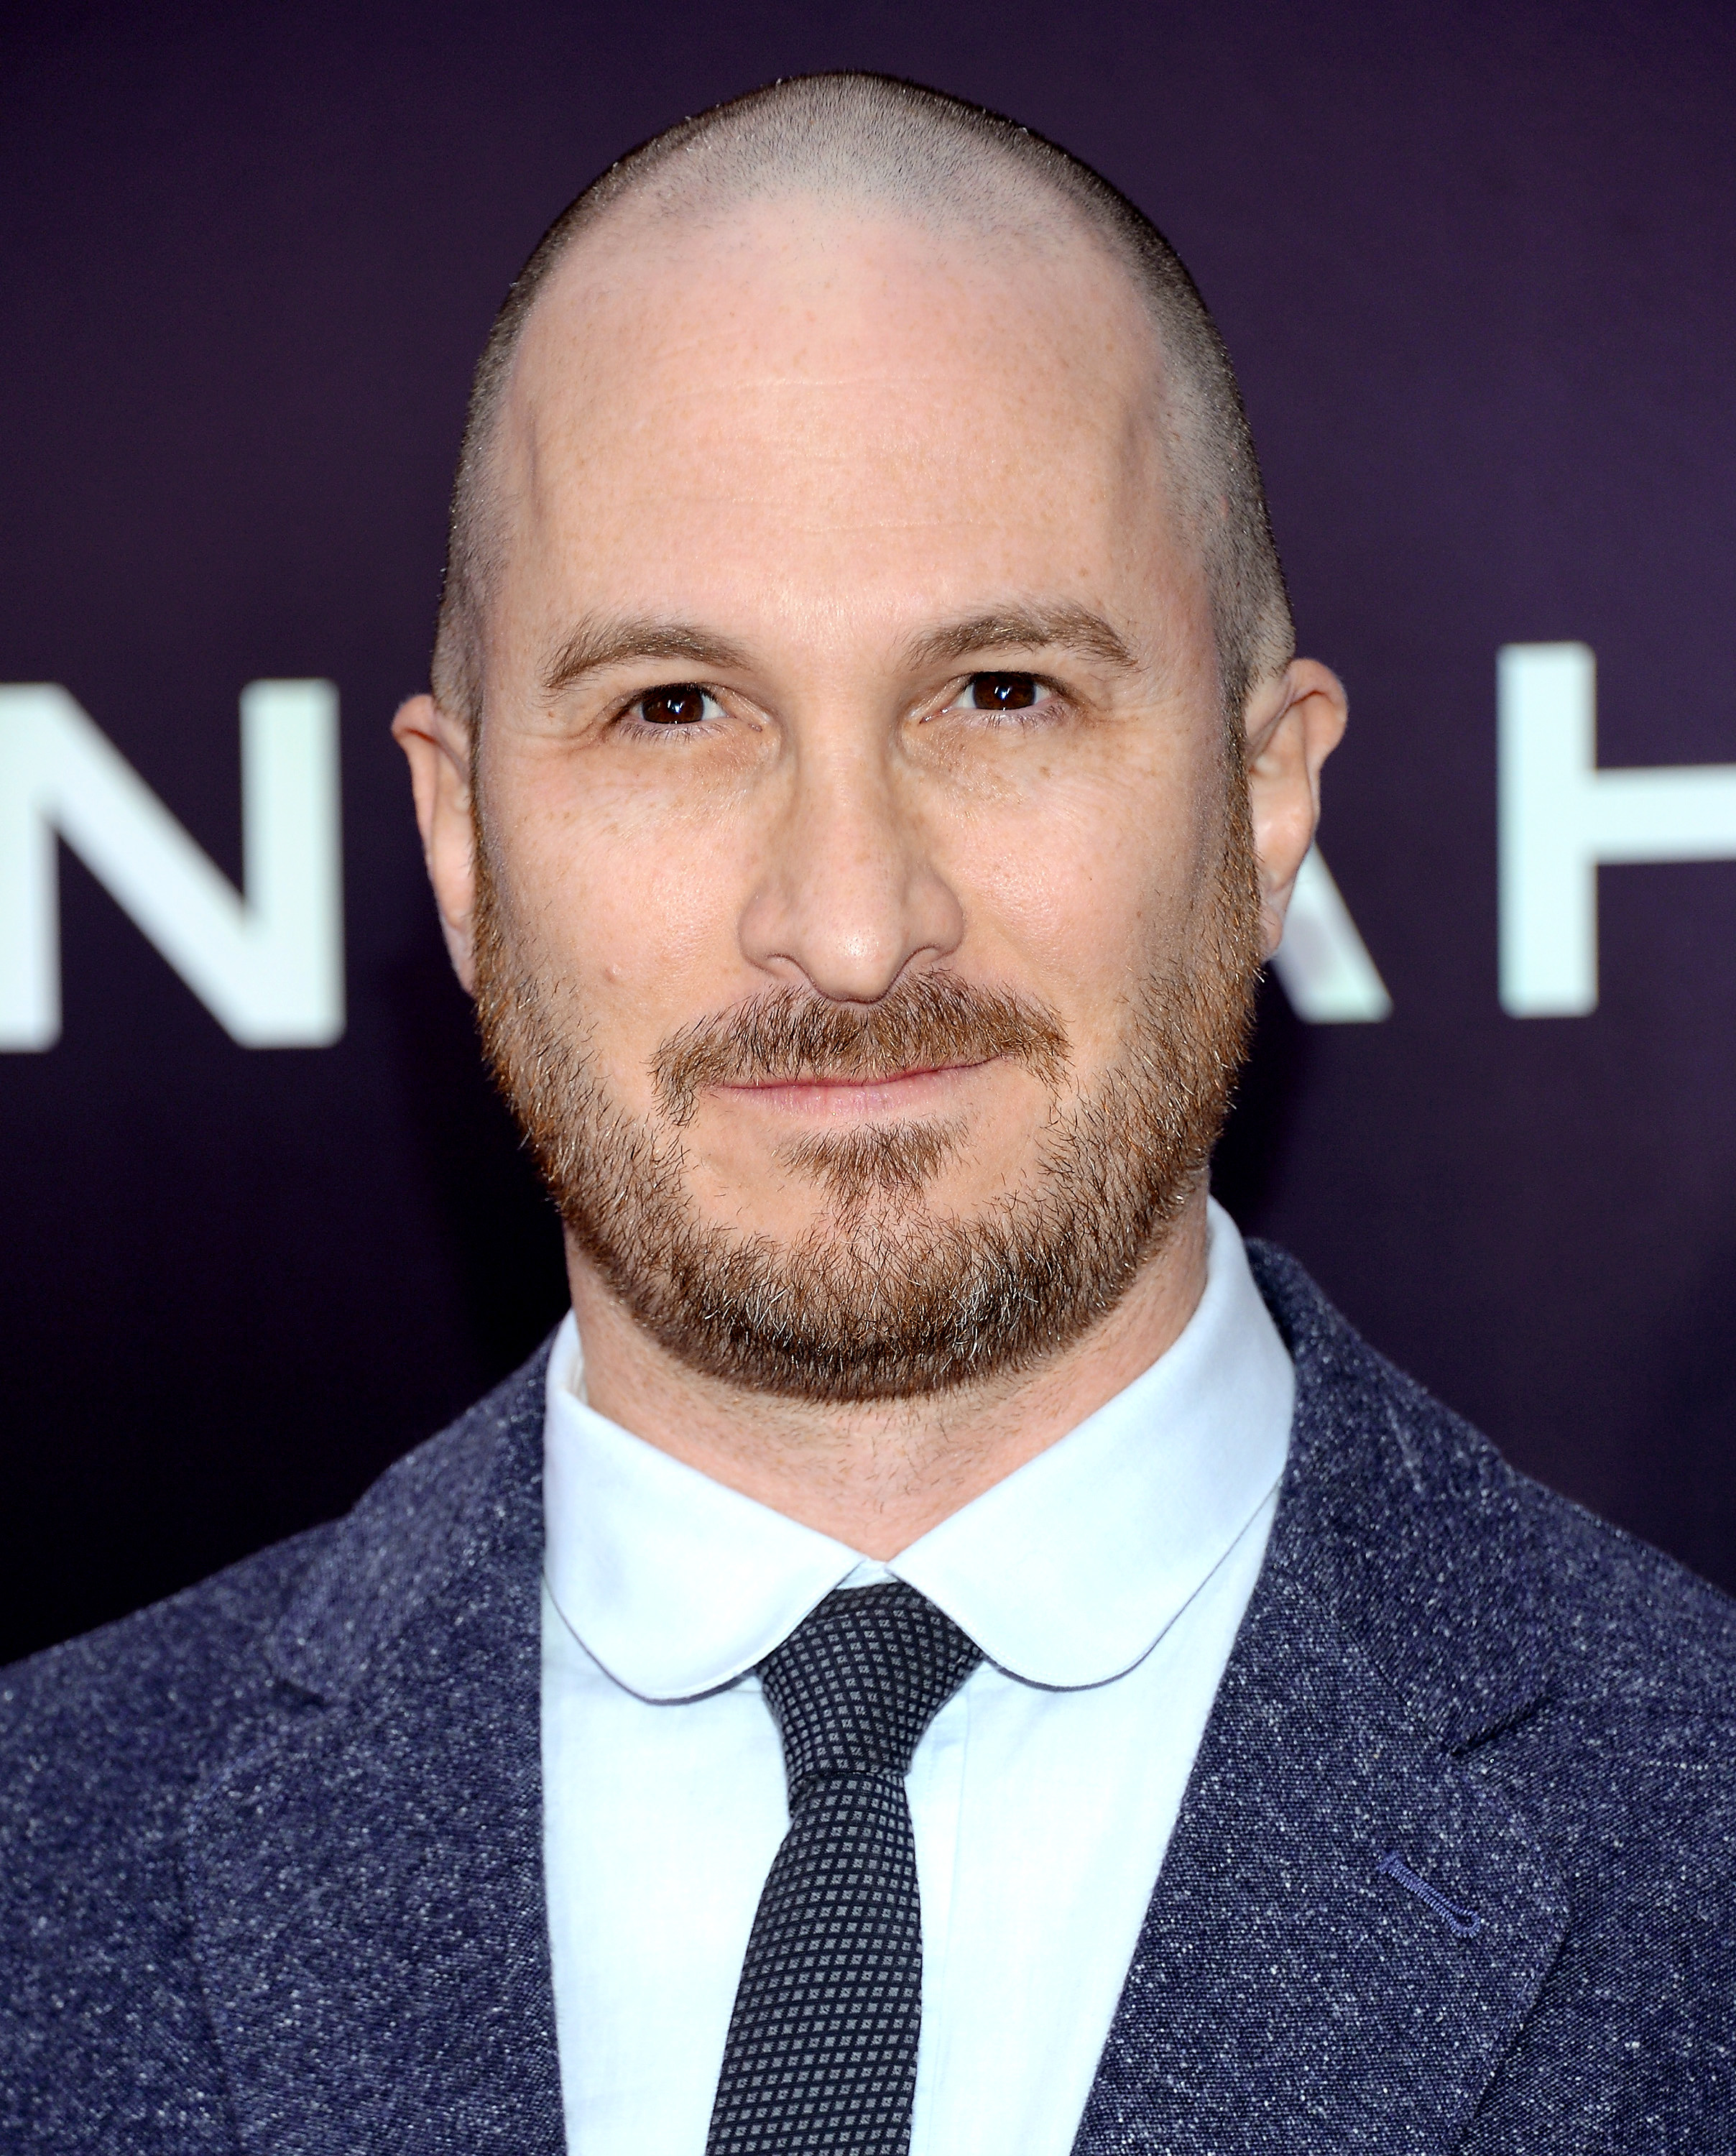 Director Darren Aronofsky attends the premiere of "Noah" at the Ziegfeld Theatre on in New York City on March 26, 2014. (Evan Agostini—Invision/AP)